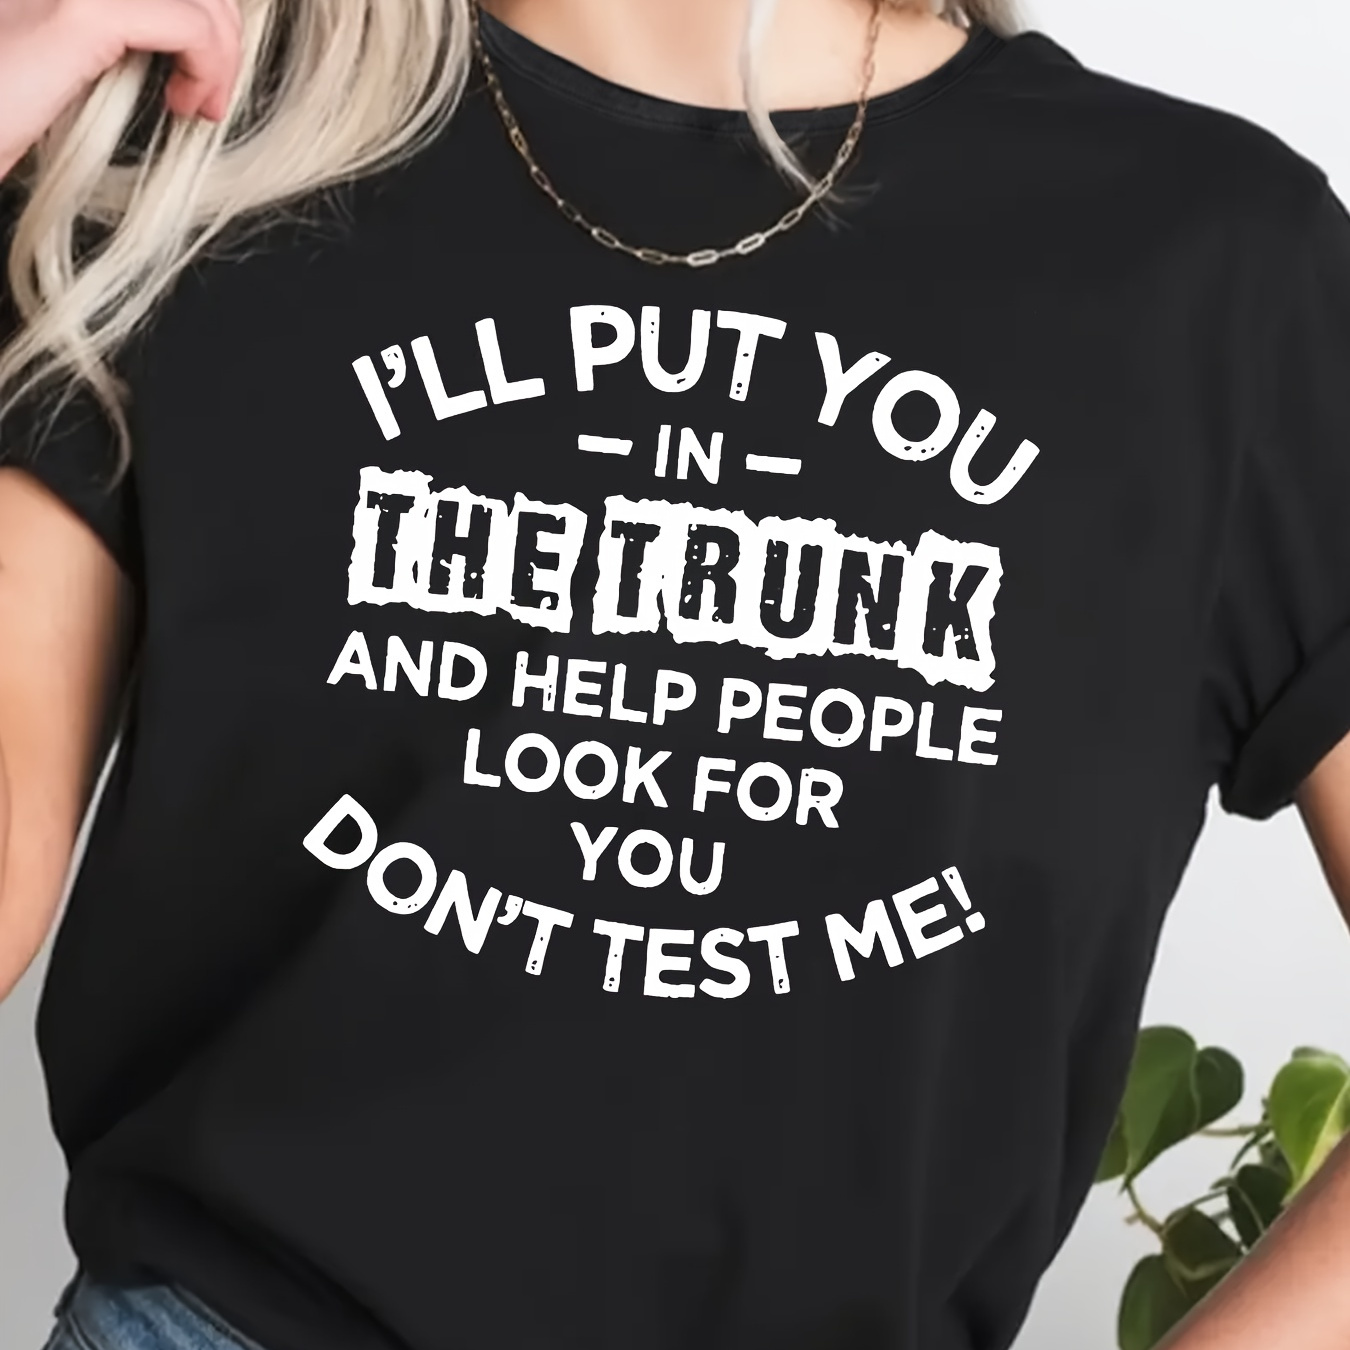 

Women's Casual Short Sleeve T-shirt, Letter Print, Fashion Sporty Top, Humorous Slogan "i'll Put You In The Trunk", Comfort Fit, Streetwear